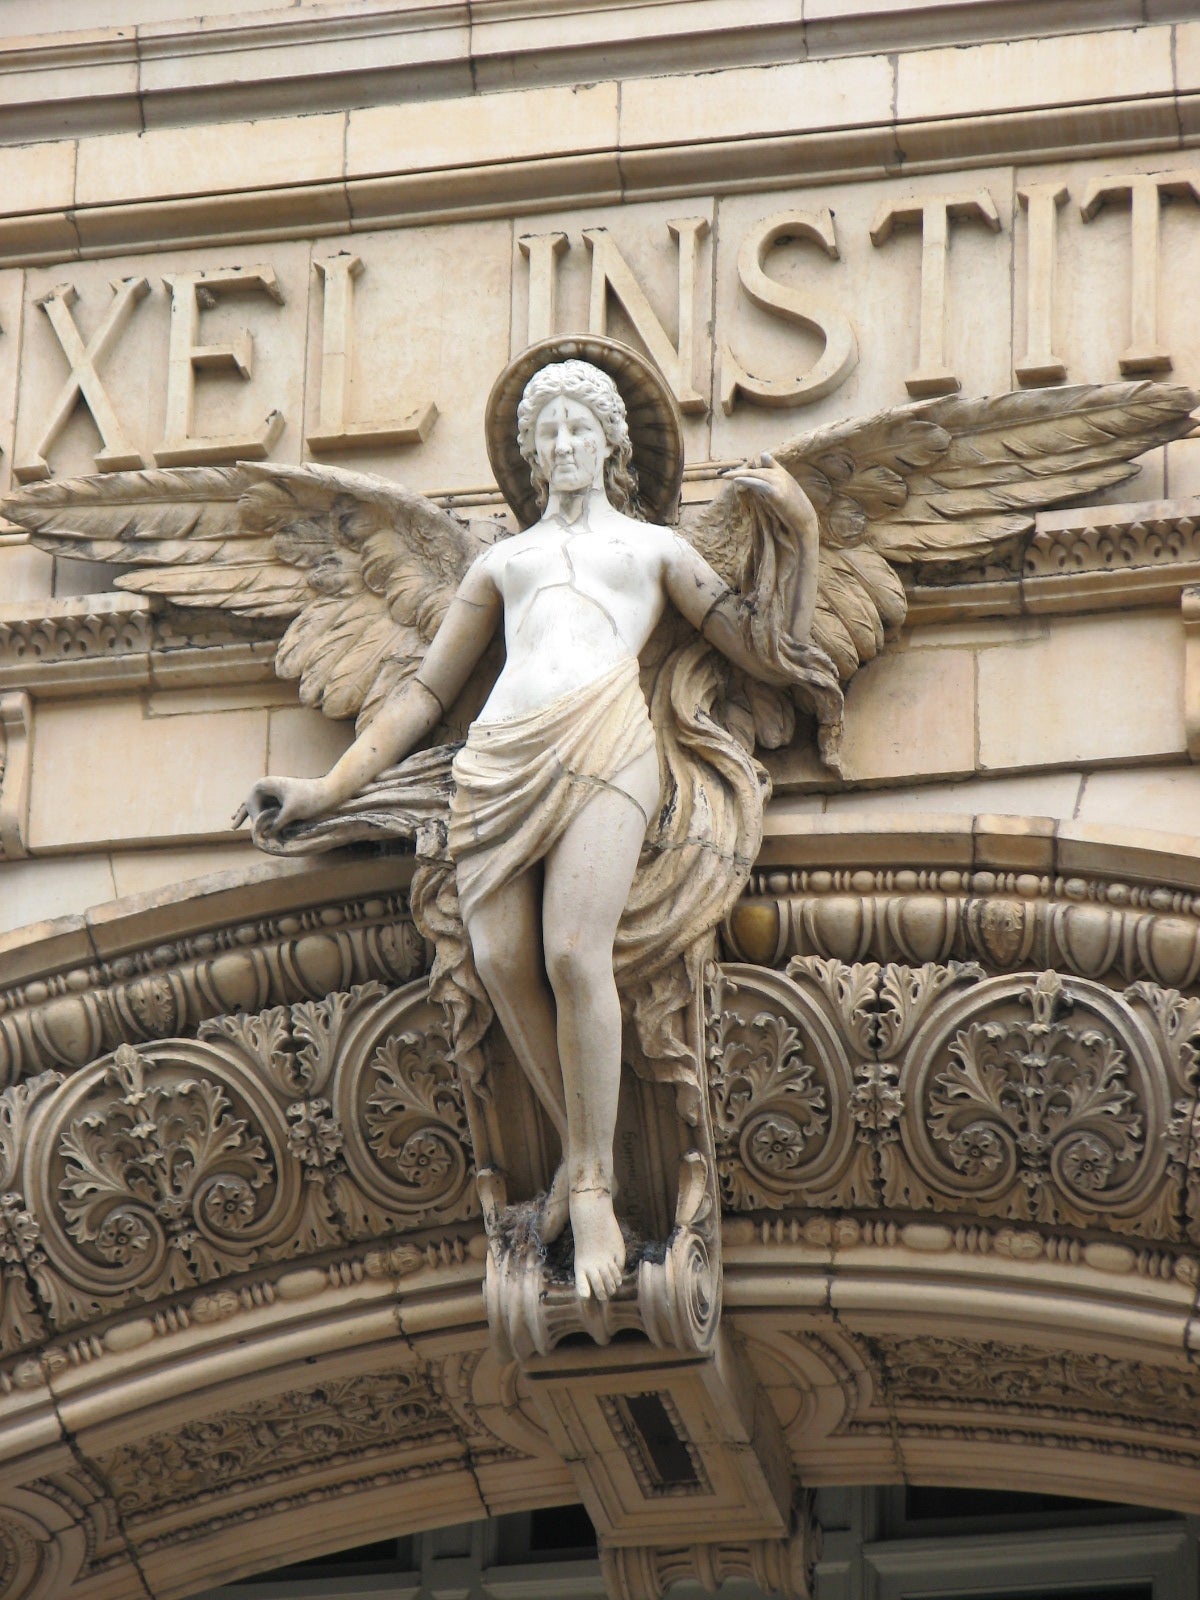  The “Genius of Knowledge” watches over visitors to the former Drexel Institute building.